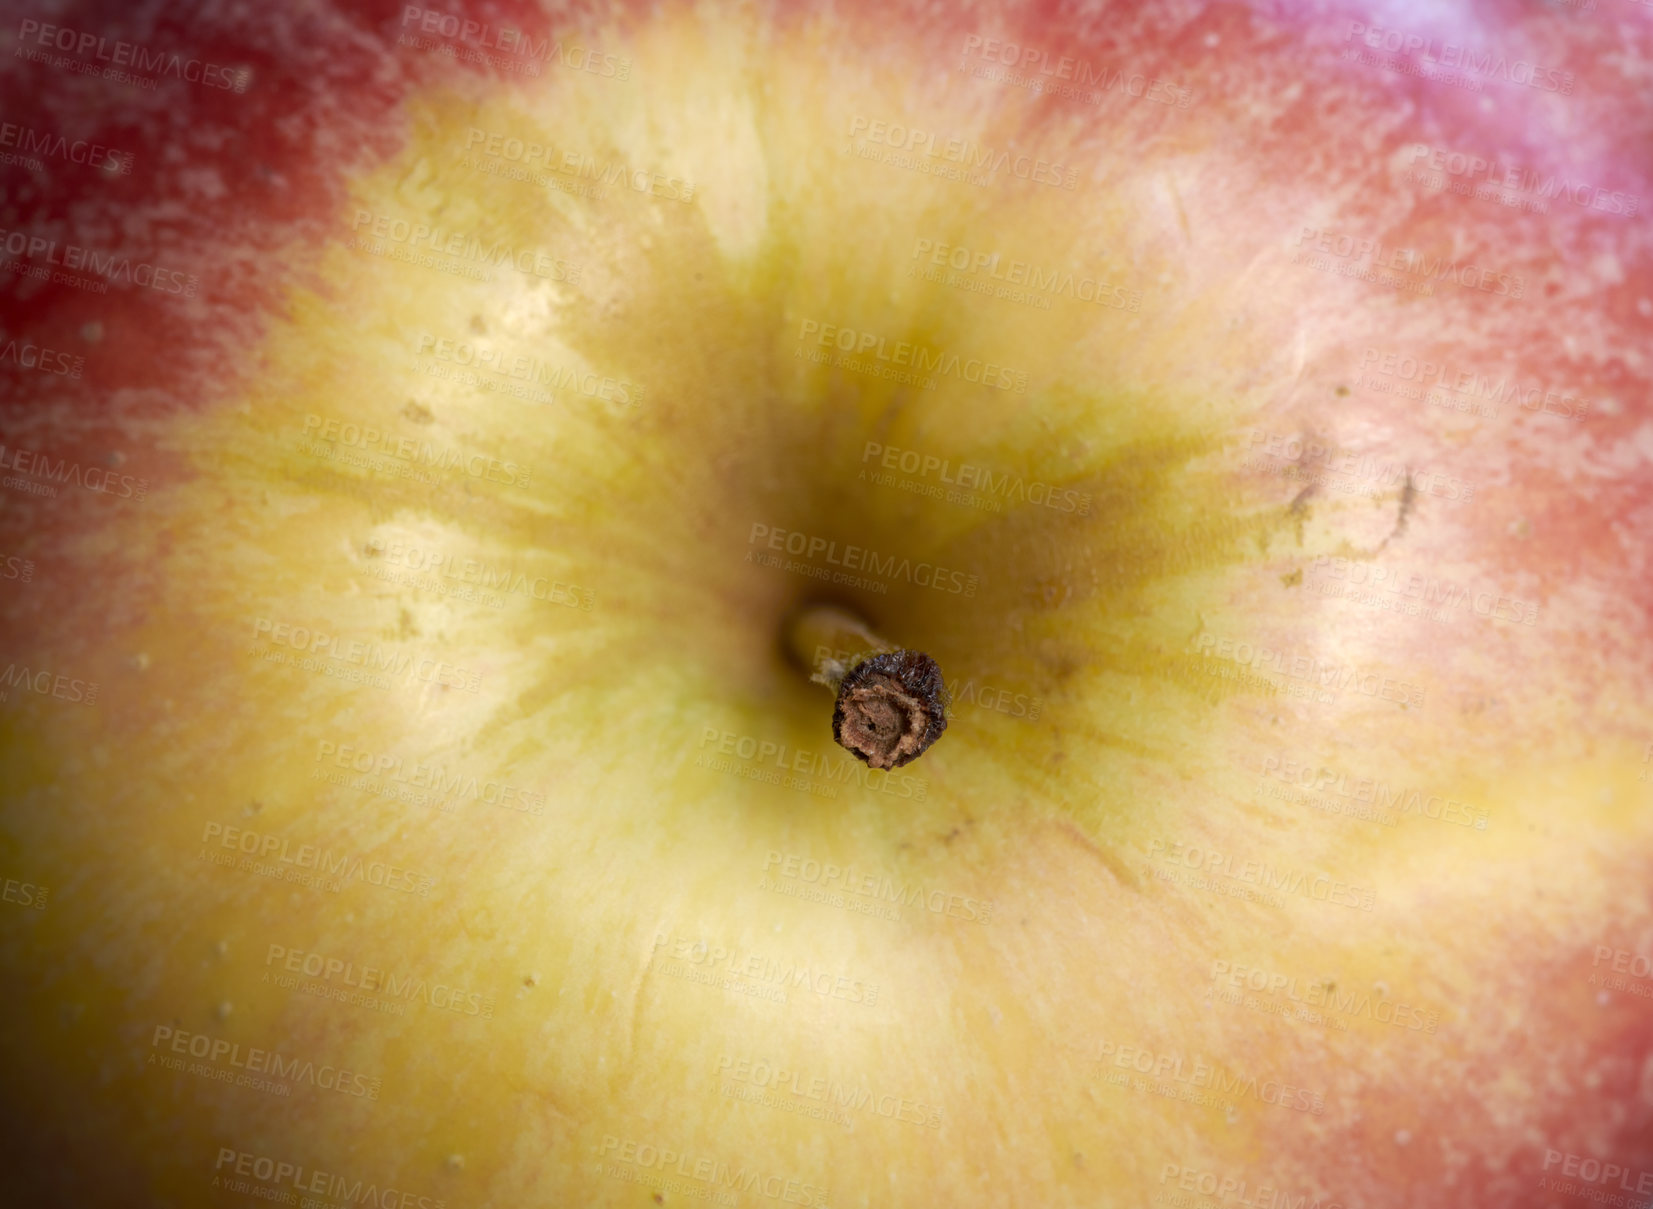 Buy stock photo Closeup of a ripe red apple zoomed in. Organic fresh produce, vegan friendly and vegetarian foods are vital for a healthy and balanced diet. Fruits have vitamins and nutrients and help boost immunity